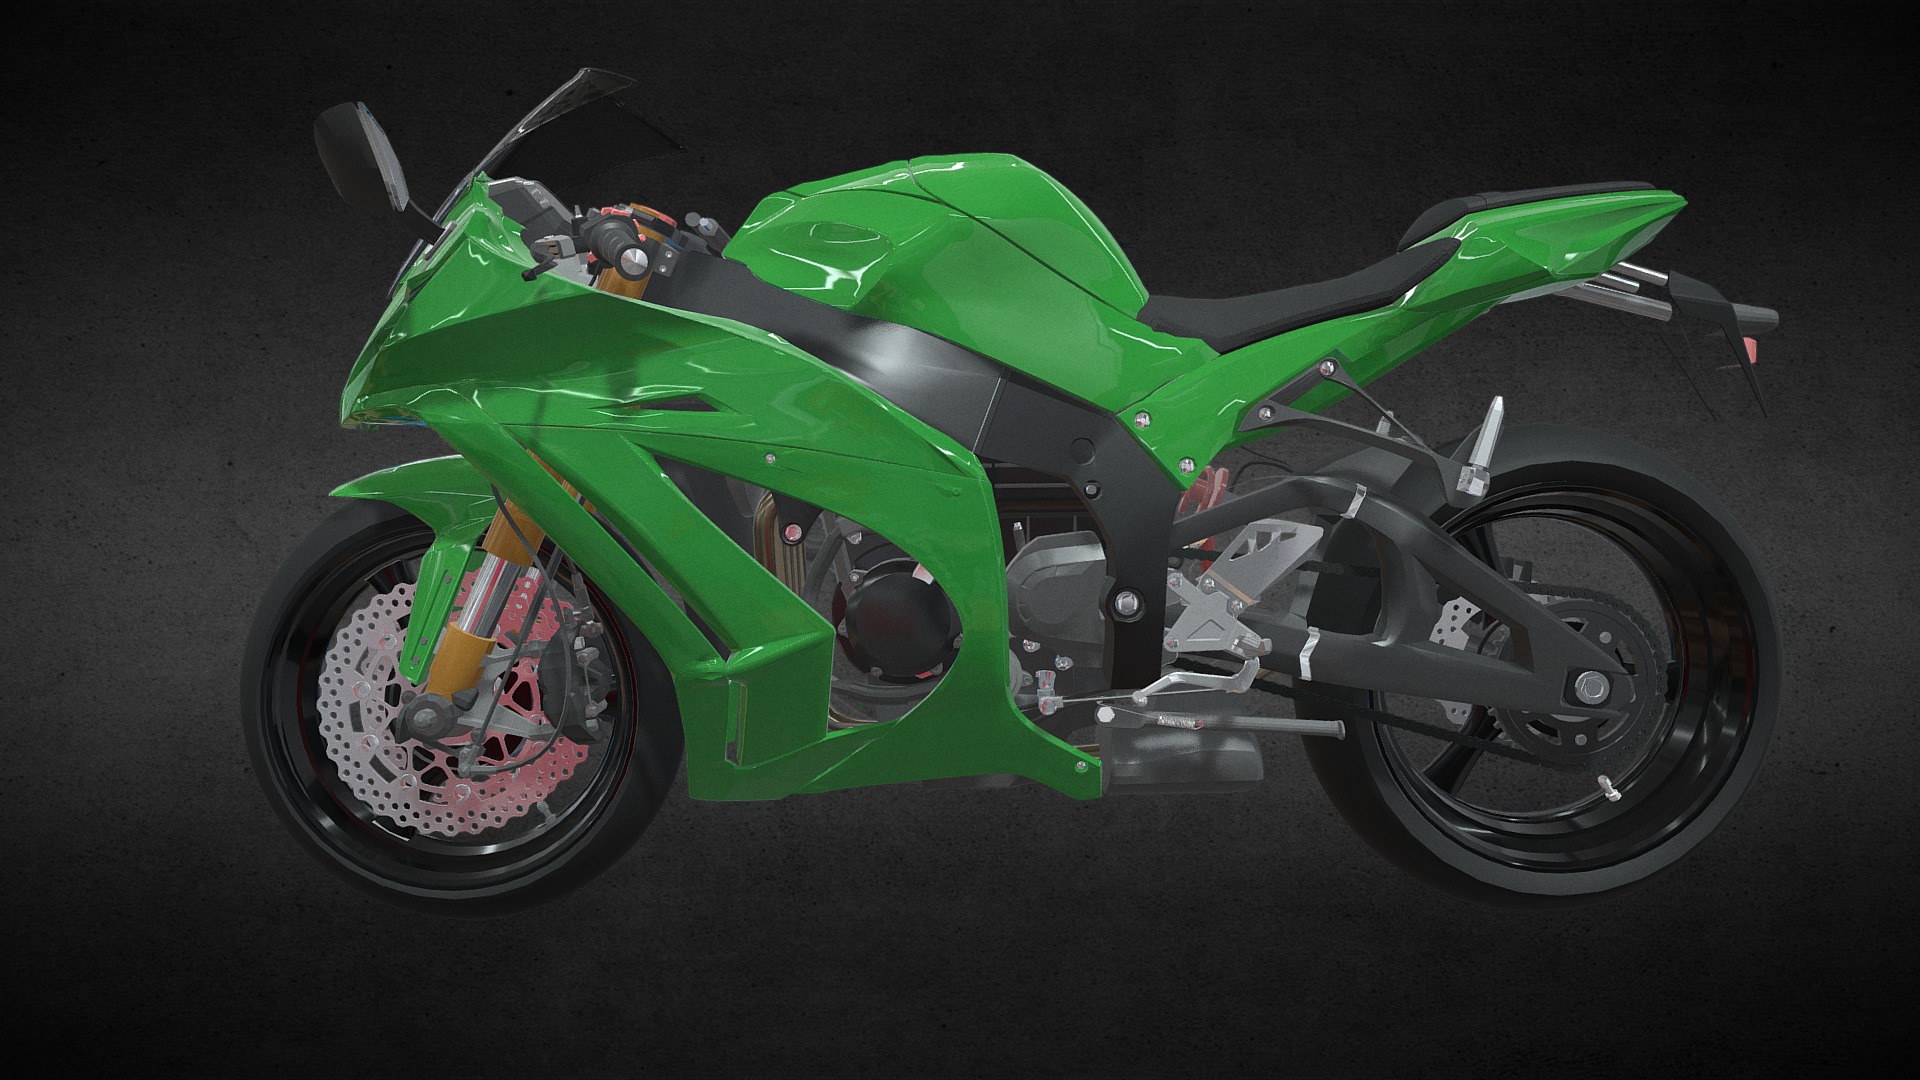 3D model kawasaki ZX10R - This is a 3D model of the kawasaki ZX10R. The 3D model is about a green motorcycle with a black background.